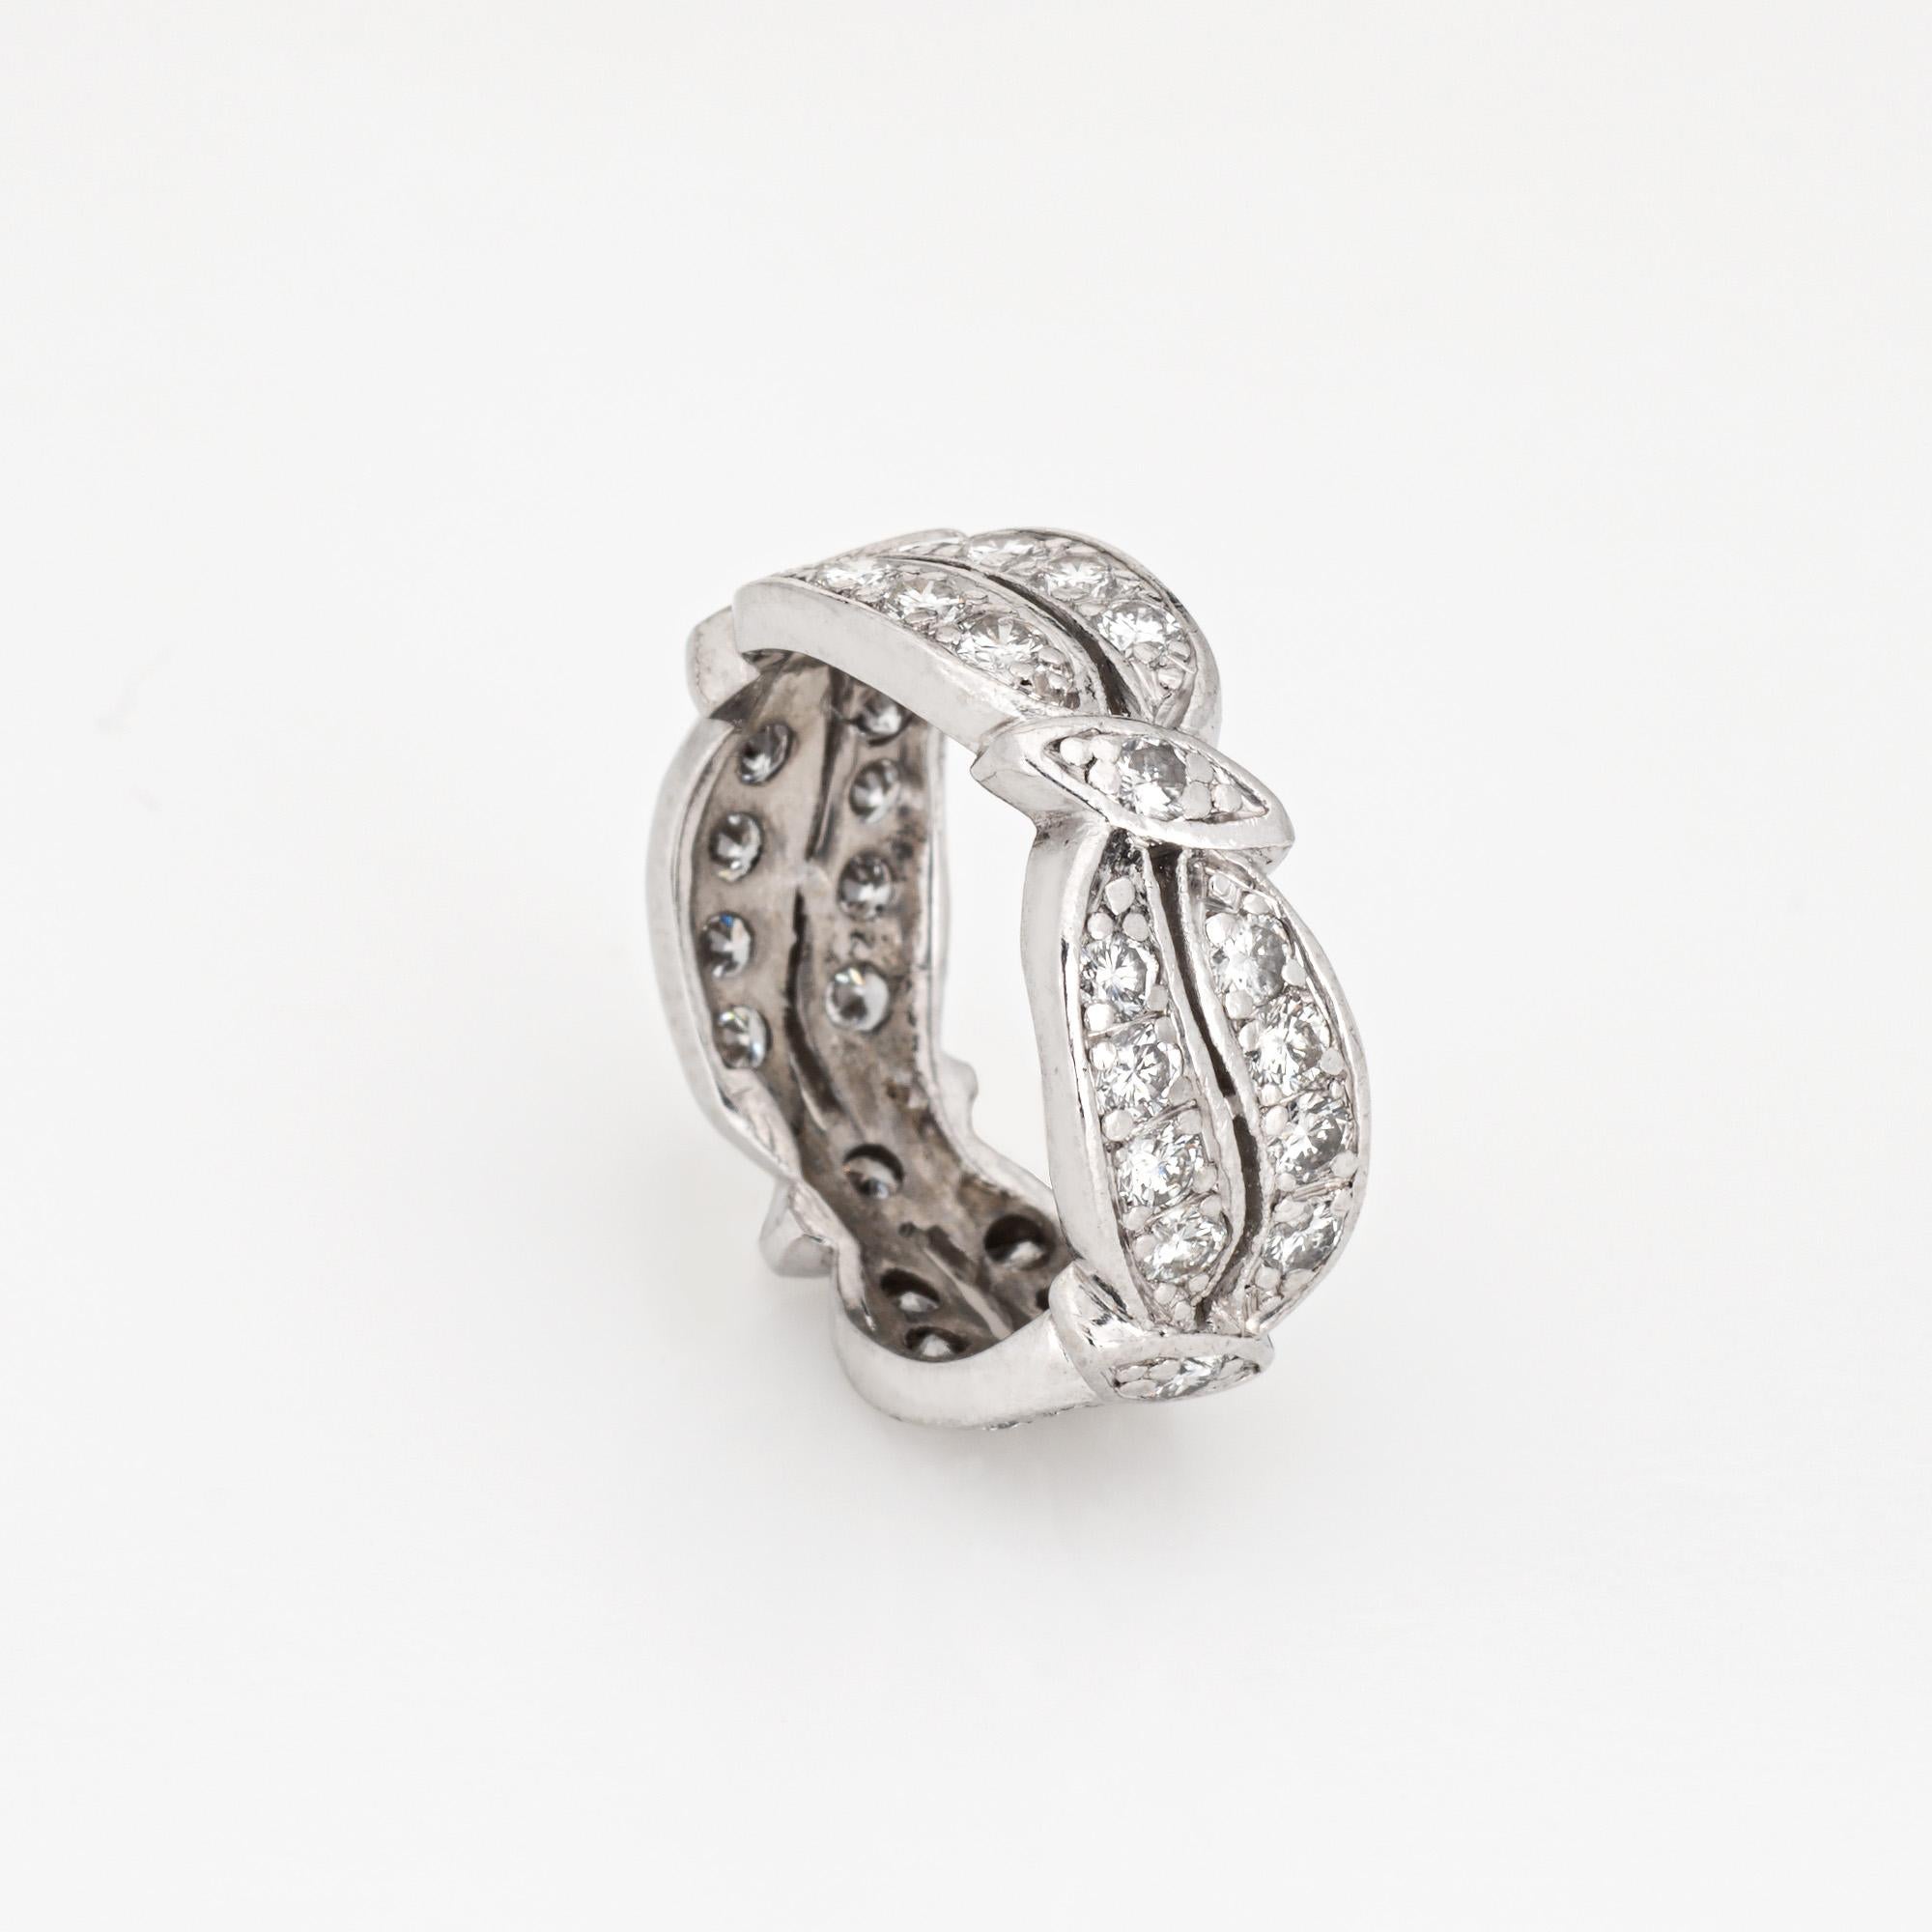 Elegant vintage diamond eternity ring (circa 1950s to 1960s), crafted in 900 platinum. 

Full round brilliant cut diamonds total an estimated 1 carat (estimated at H-I color and VS2-I1 clarity).

The ring epitomizes vintage charm and would make a